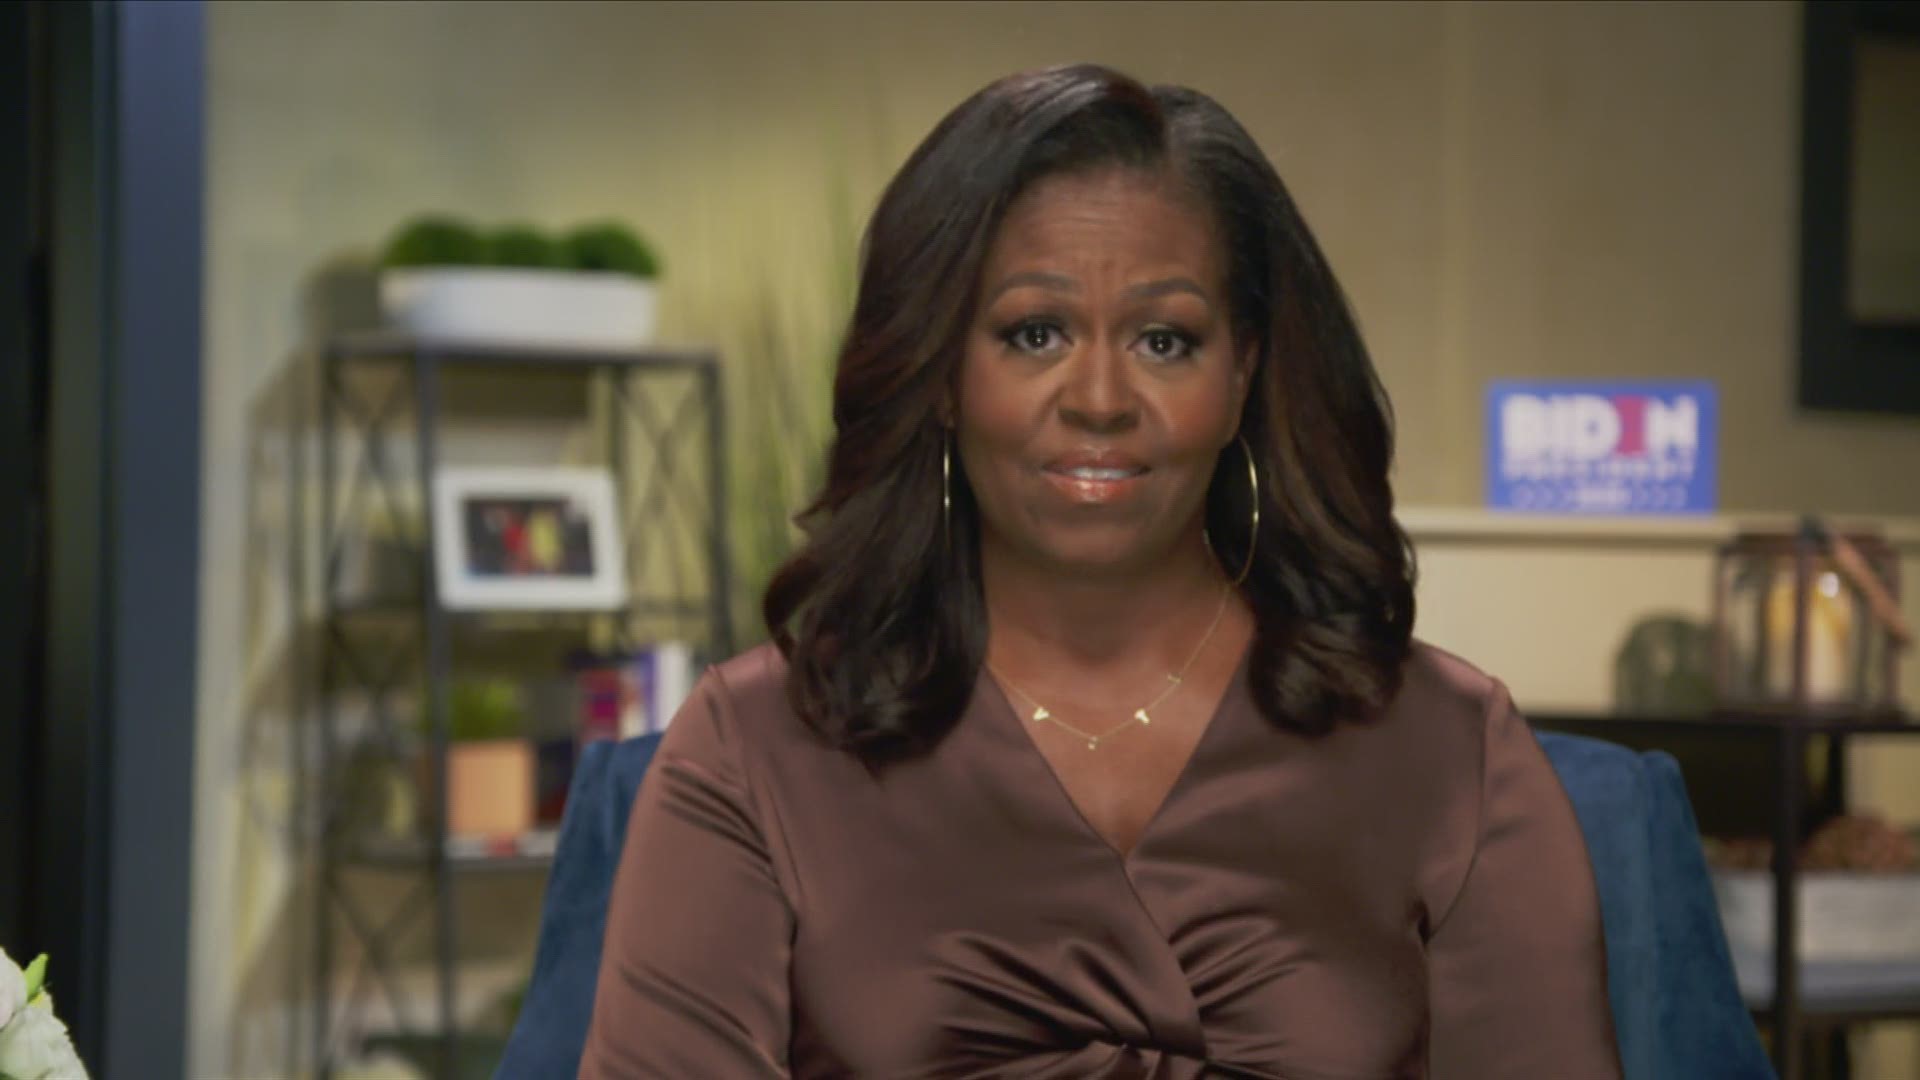 Michelle Obama told Americans during the DNC that now is 'not the time to withhold our votes in protests' and implored people to vote like it's 2008 and 2012.